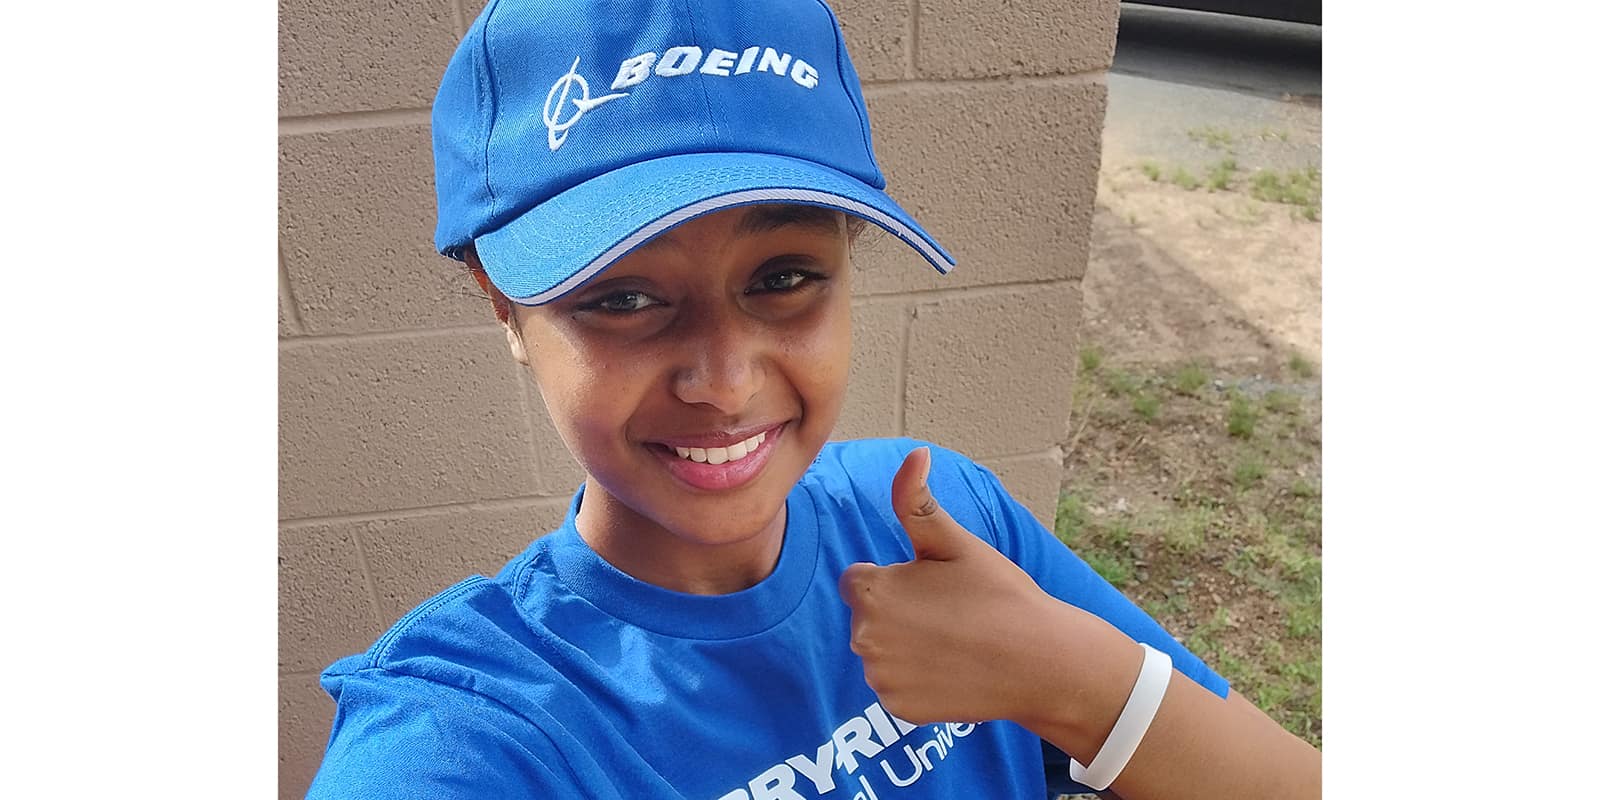 Liyat is happy to see her hard work pay off and be recognized by Boeing. (Photo: Liyat Tsehai)